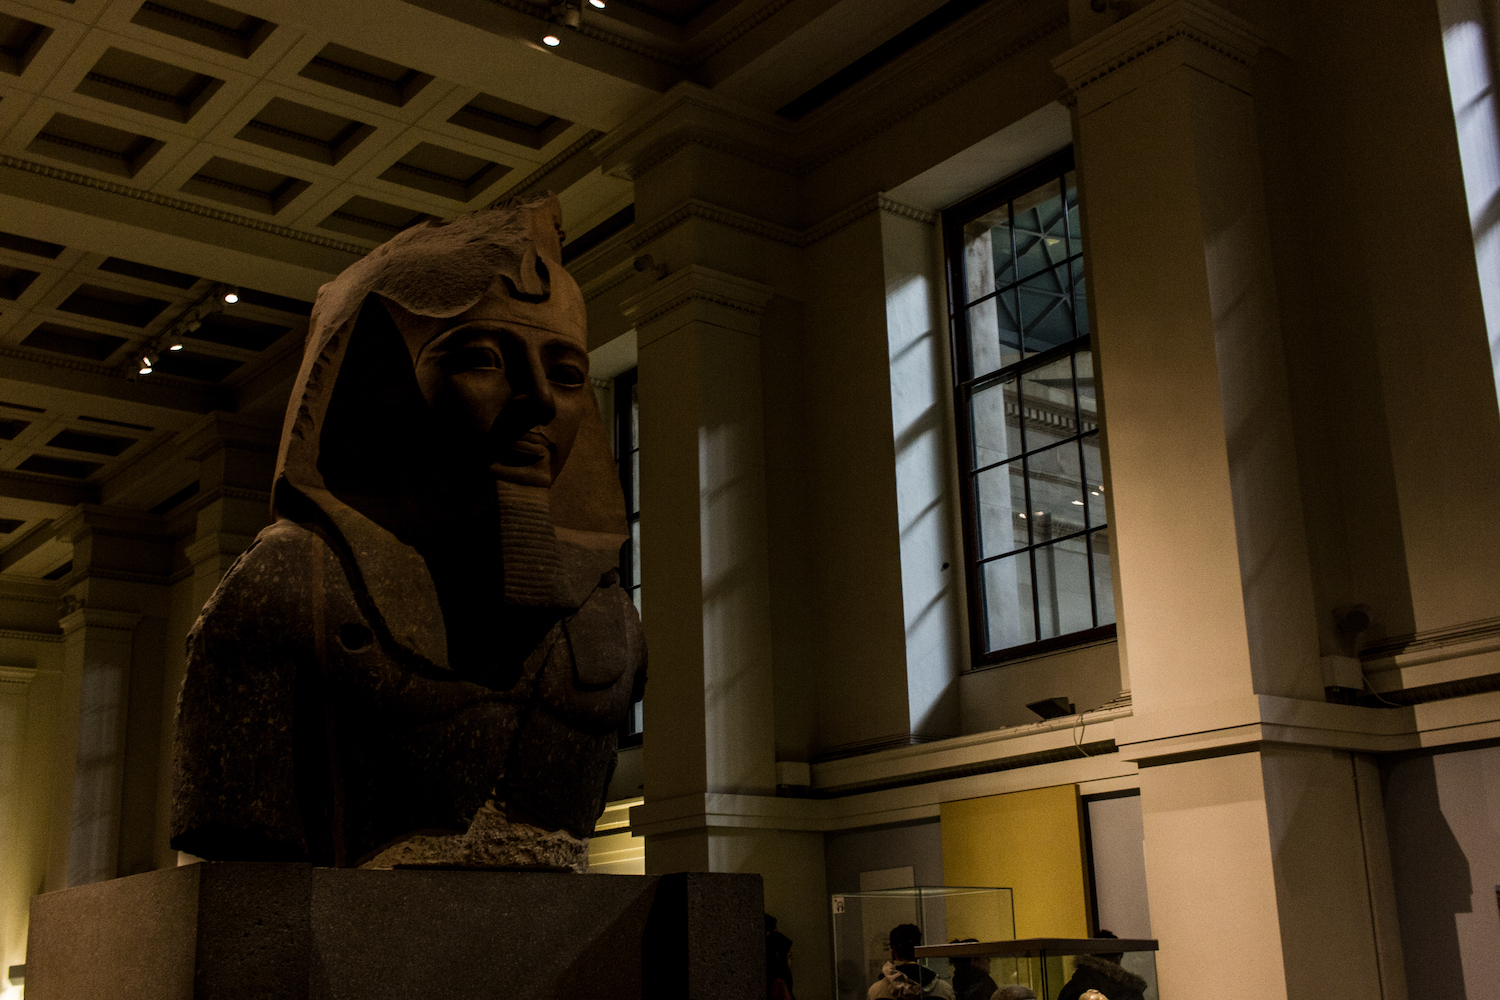 Professional Photography Stone Sculpture From Kemet Egypt Of King Ramses II In British Museum London